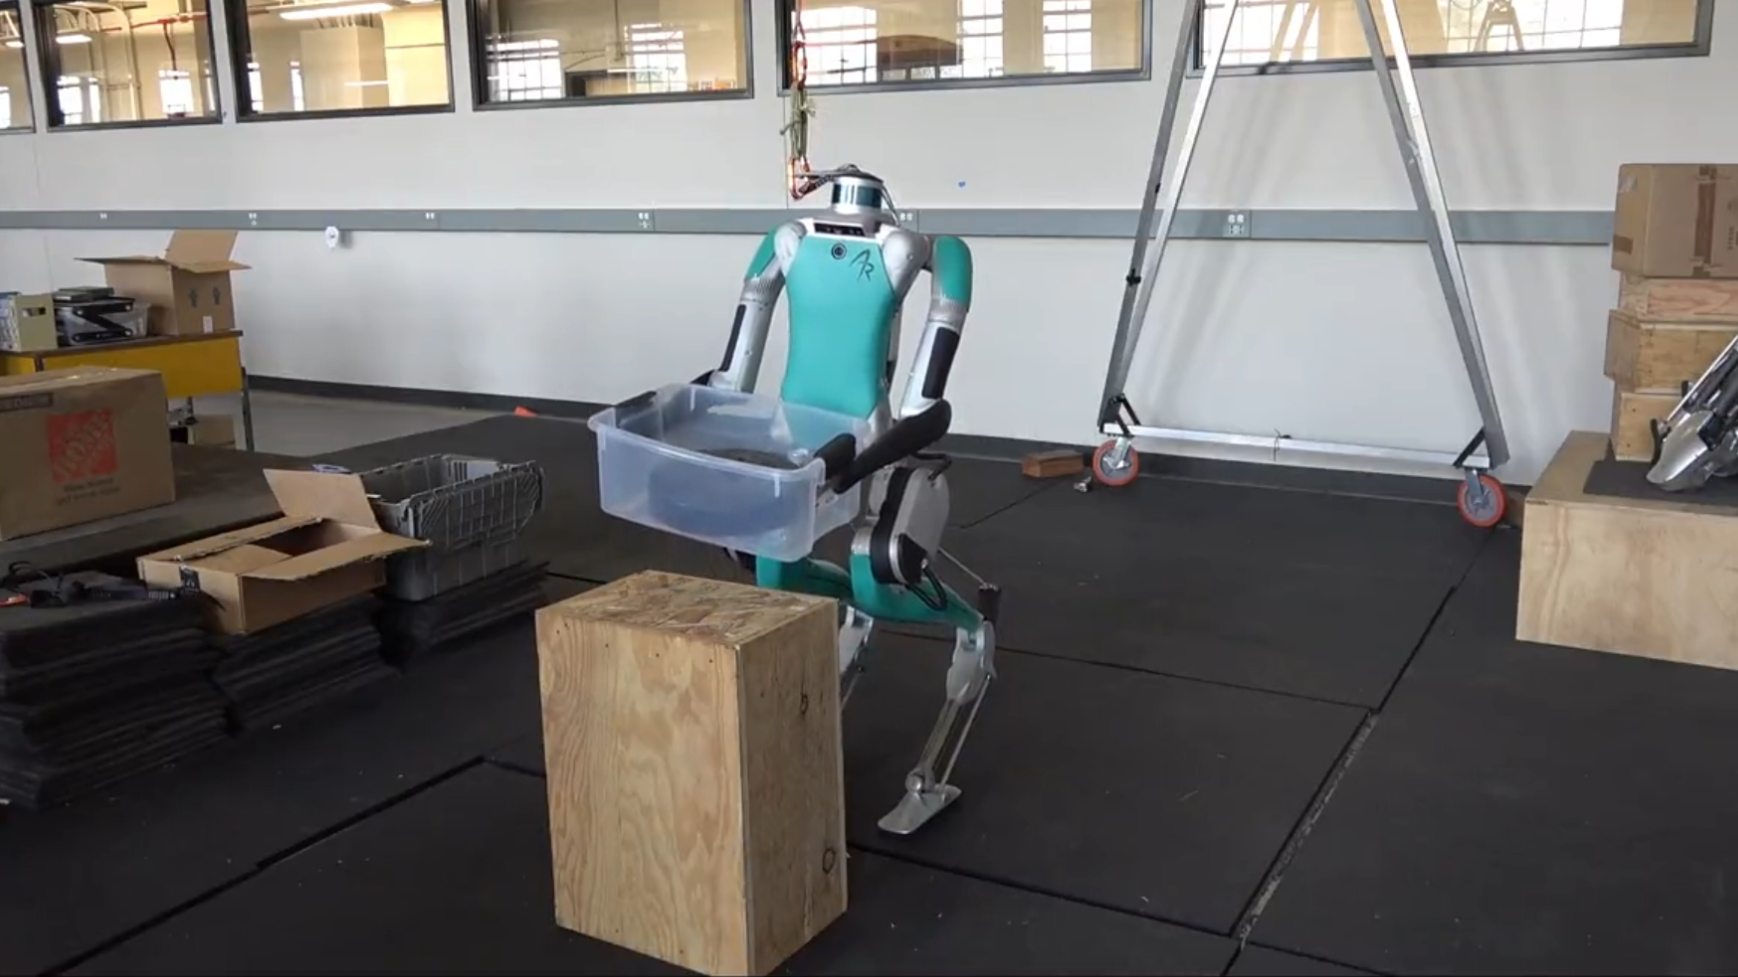 Researchers taught robots to run. Now they’re teaching them to walk ...